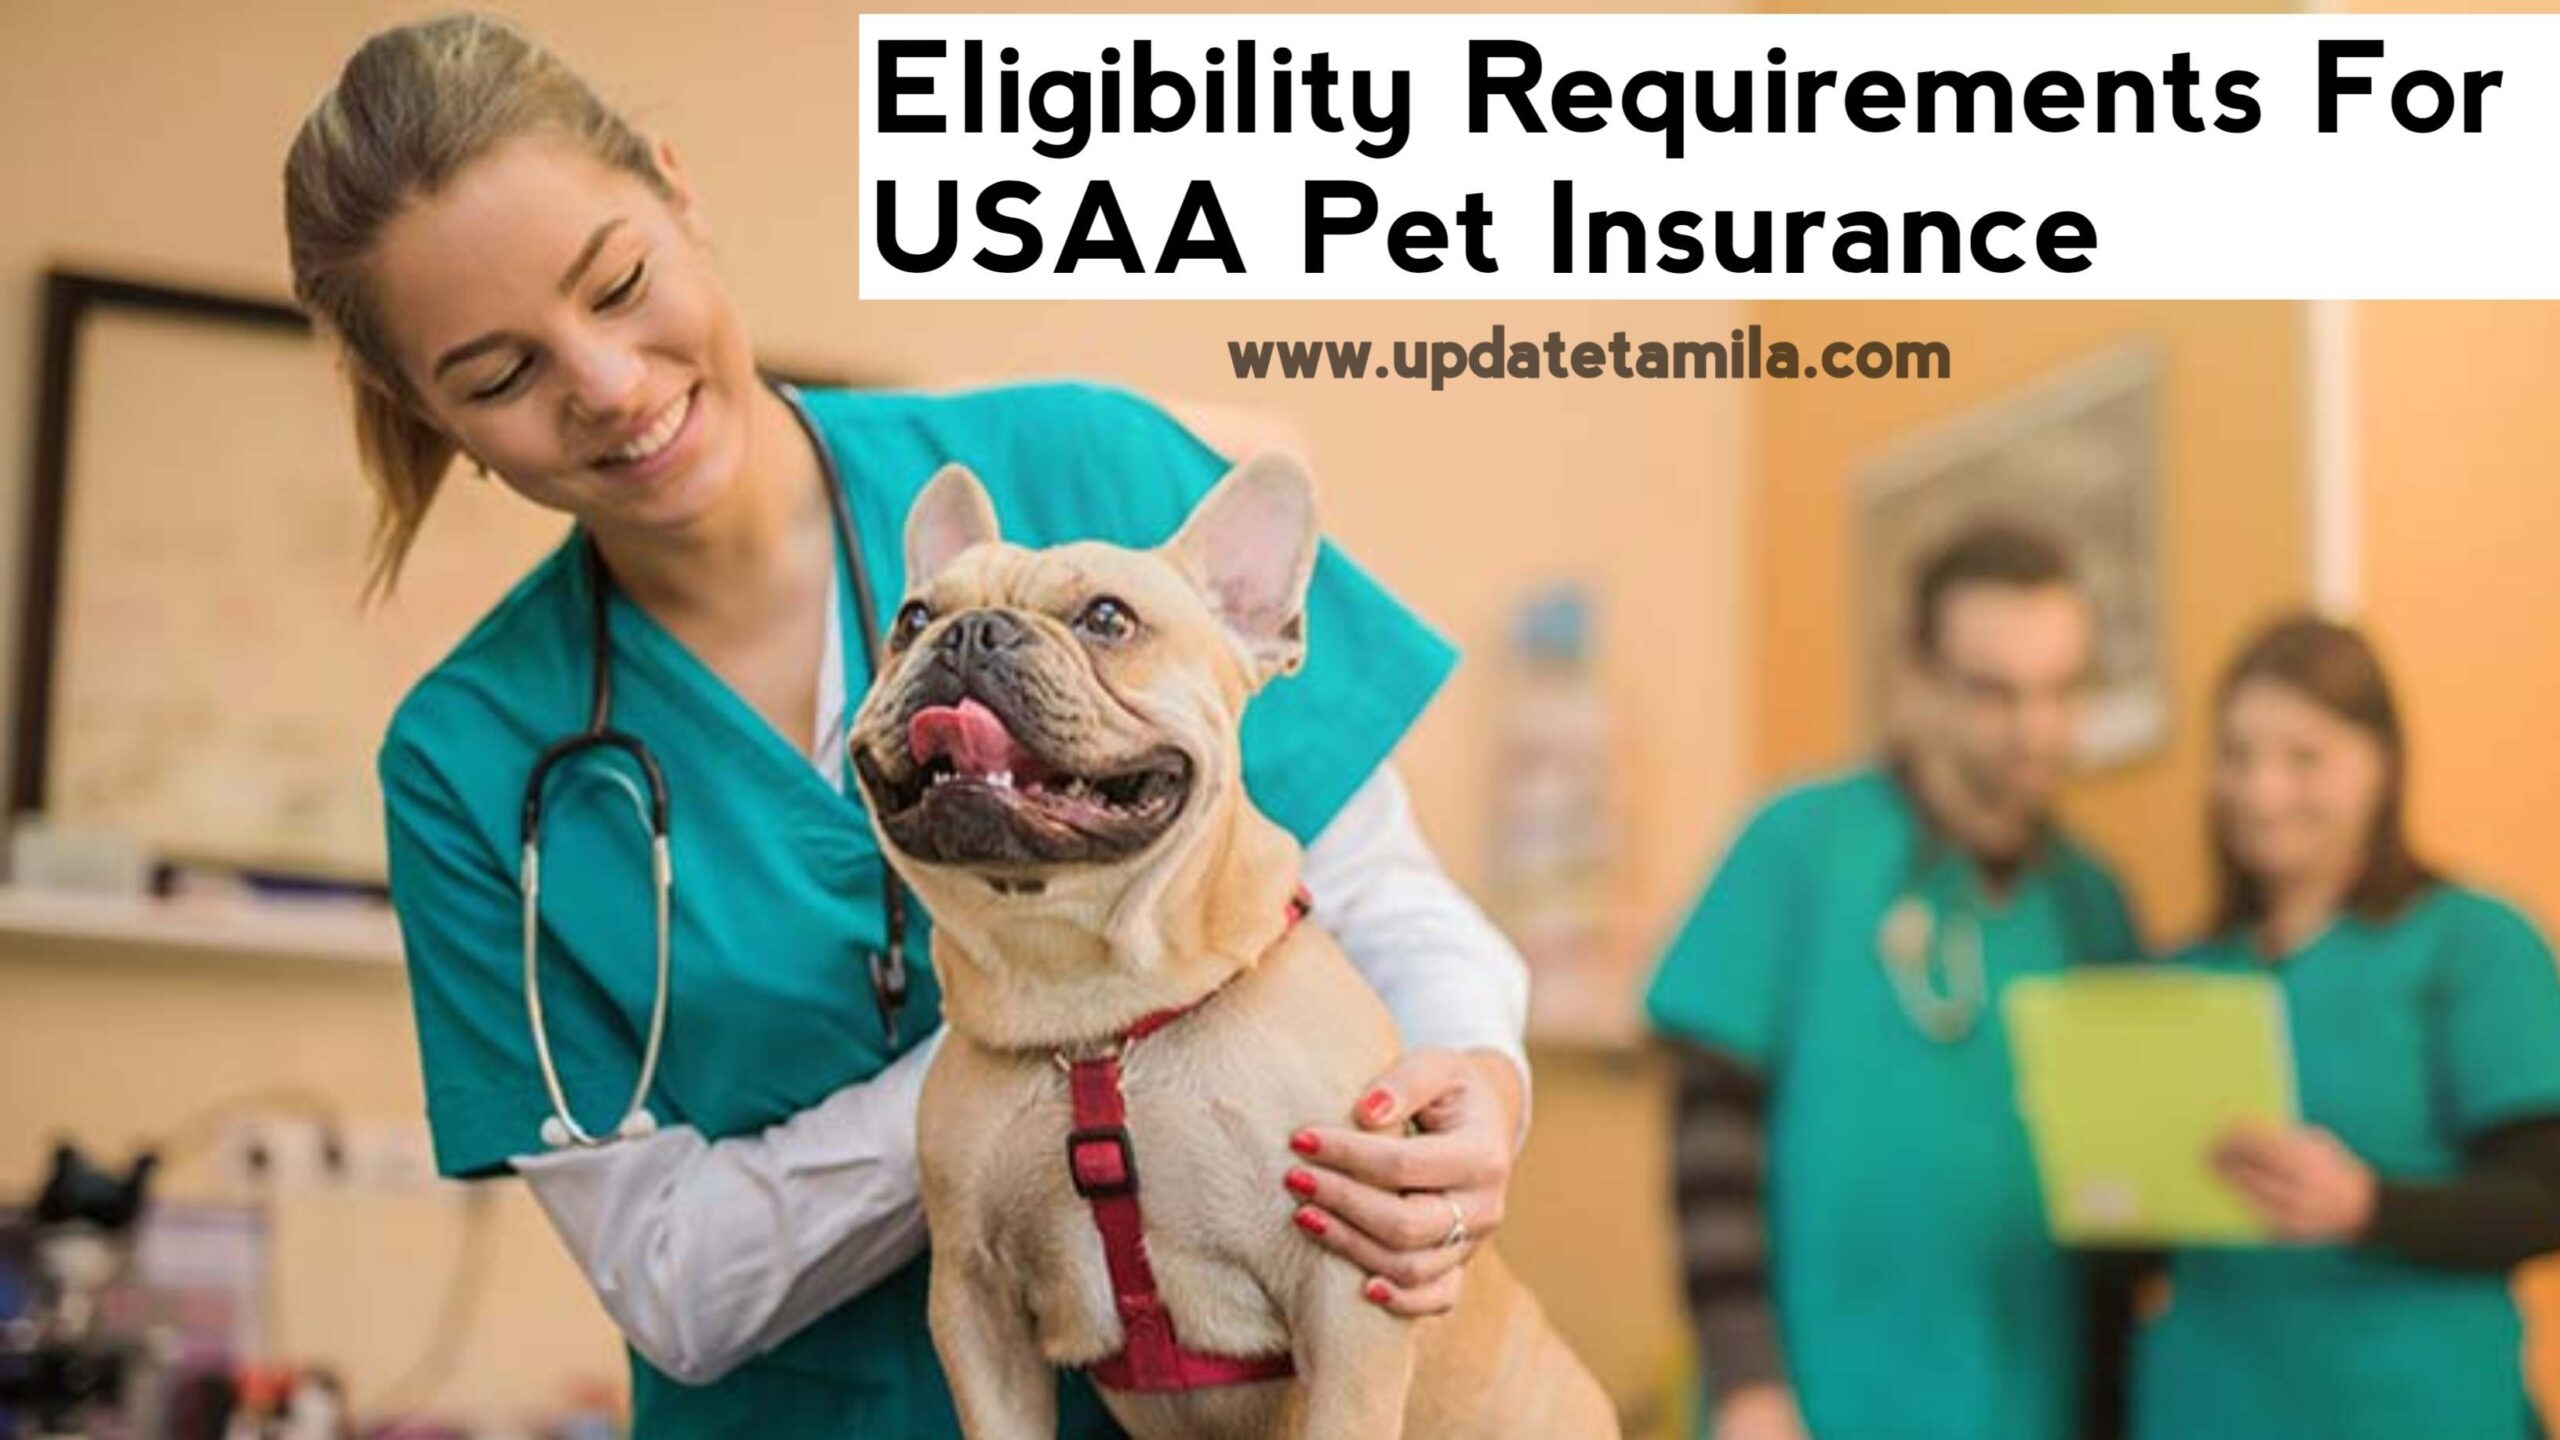 Eligibility Requirements for USAA Pet Insurance